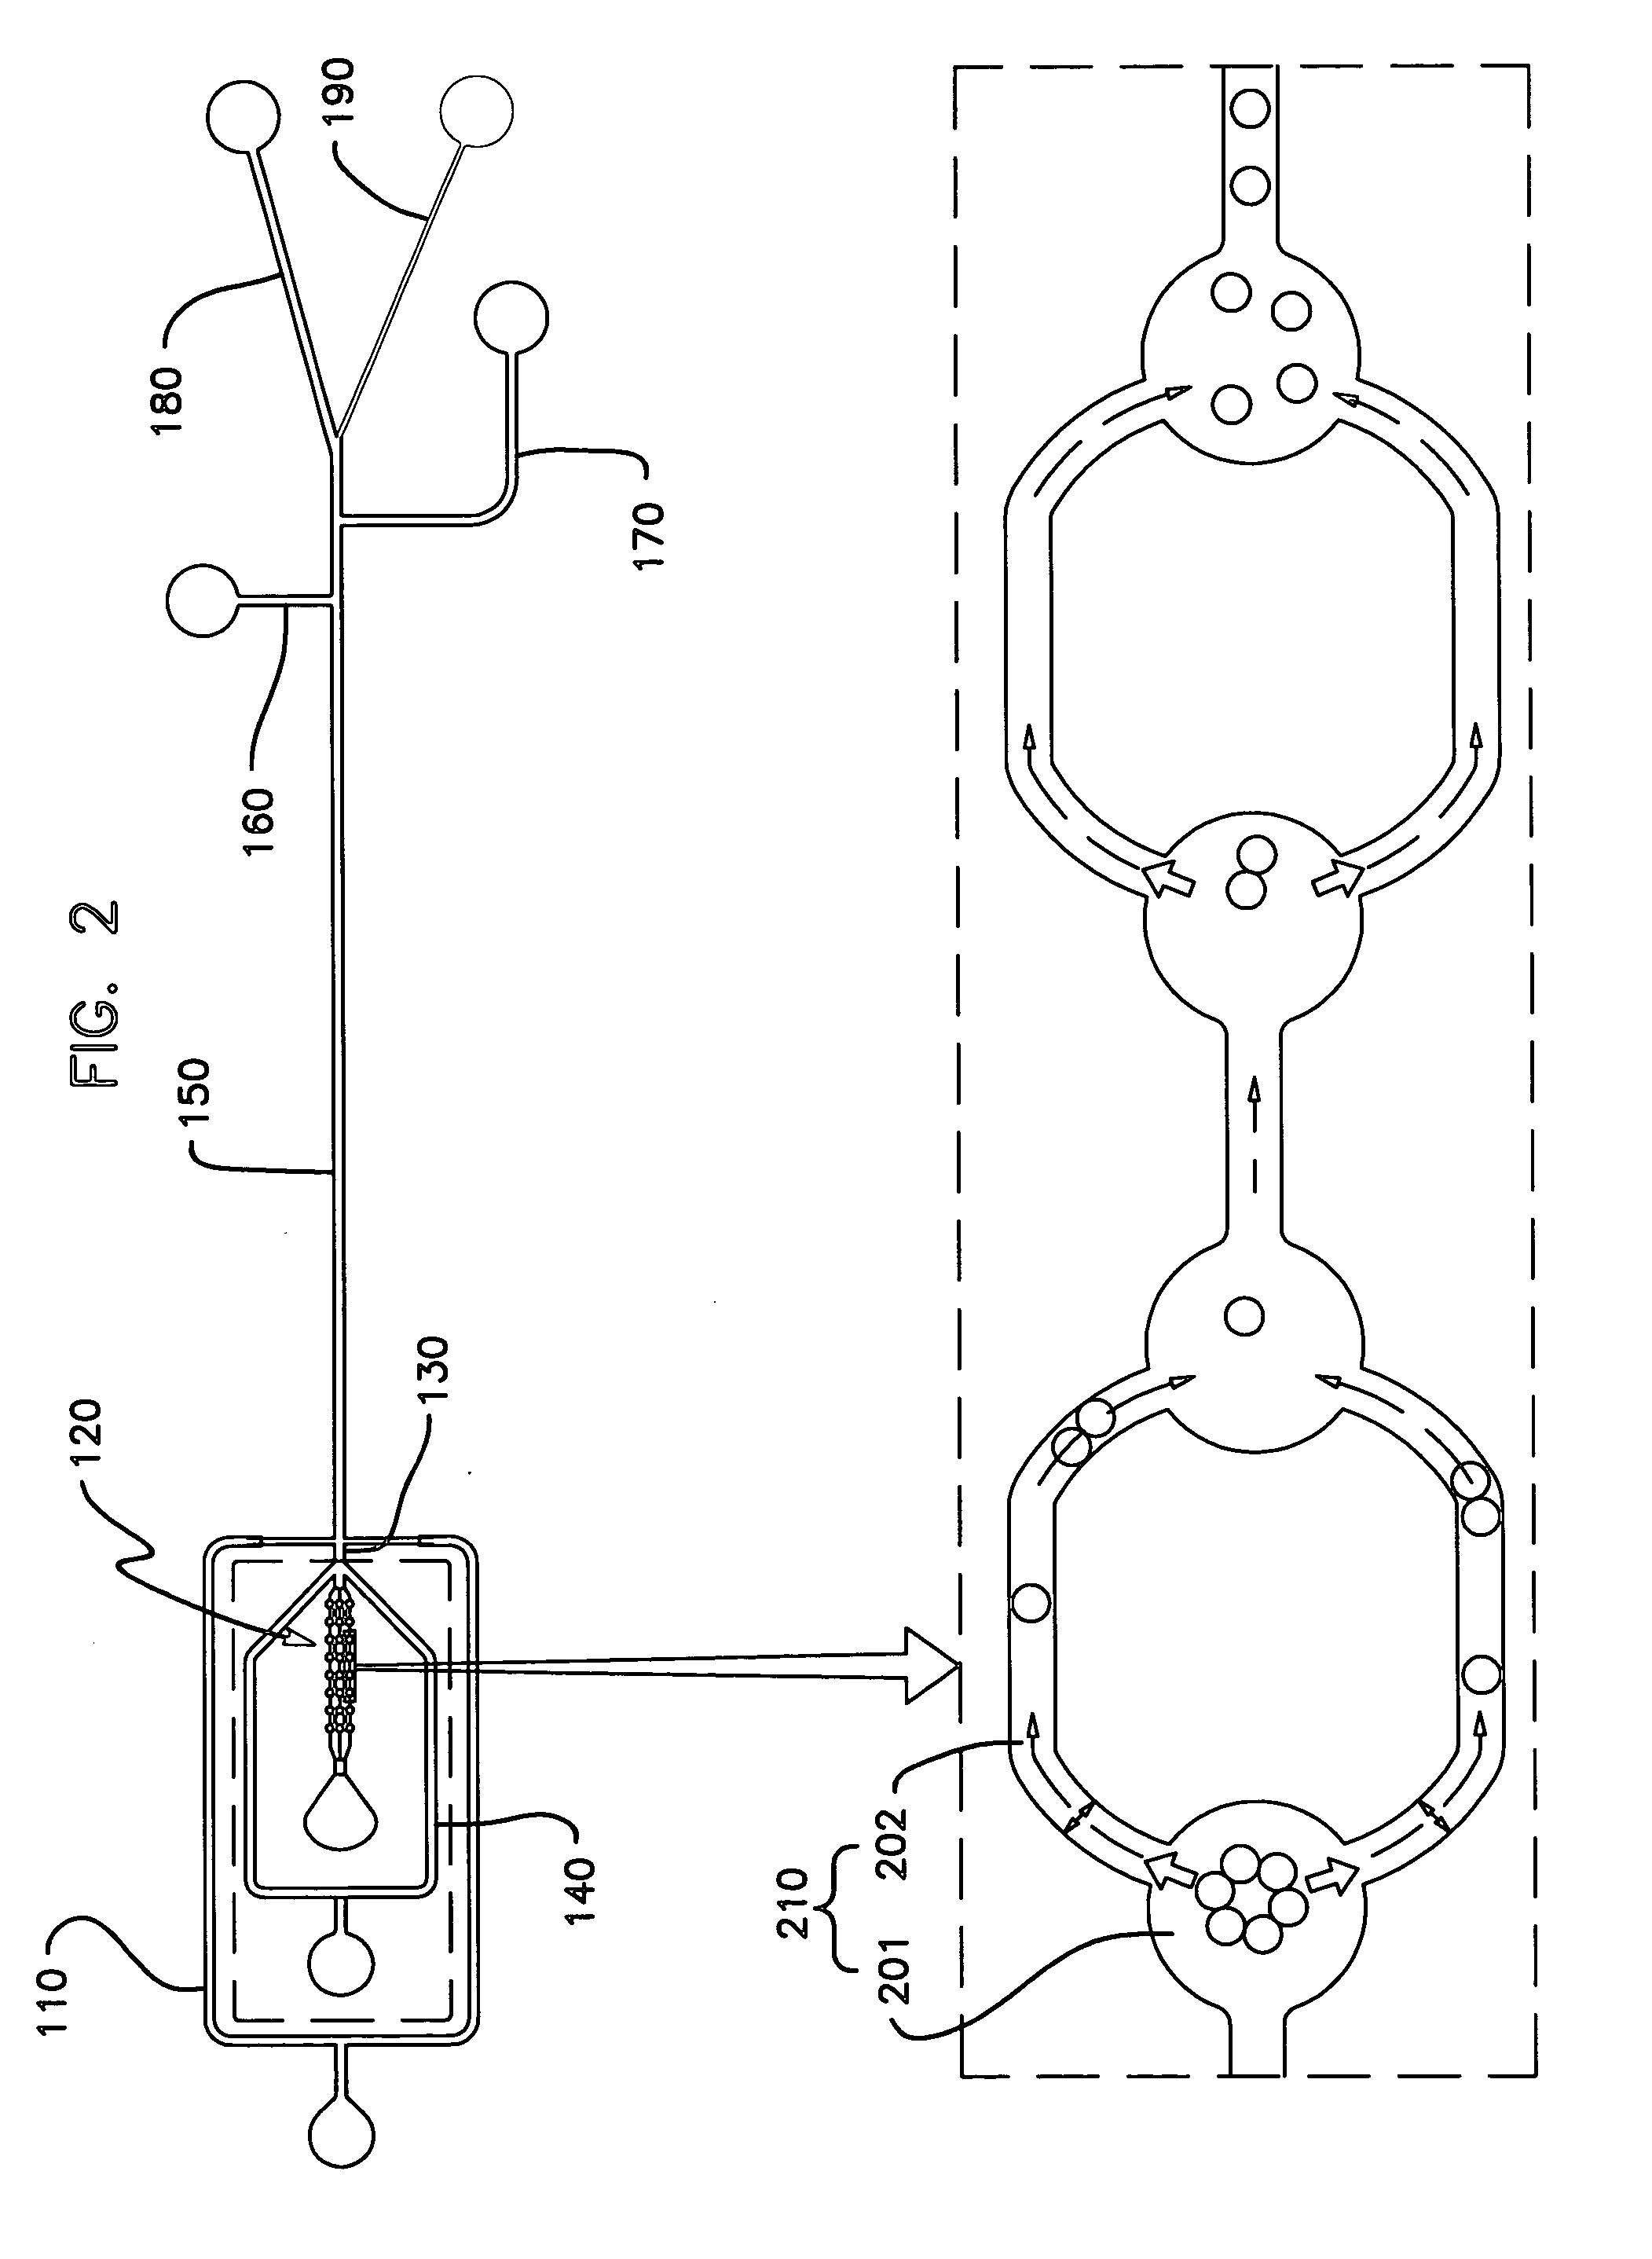 Apparatus and method for fabricating Micro-Capsule